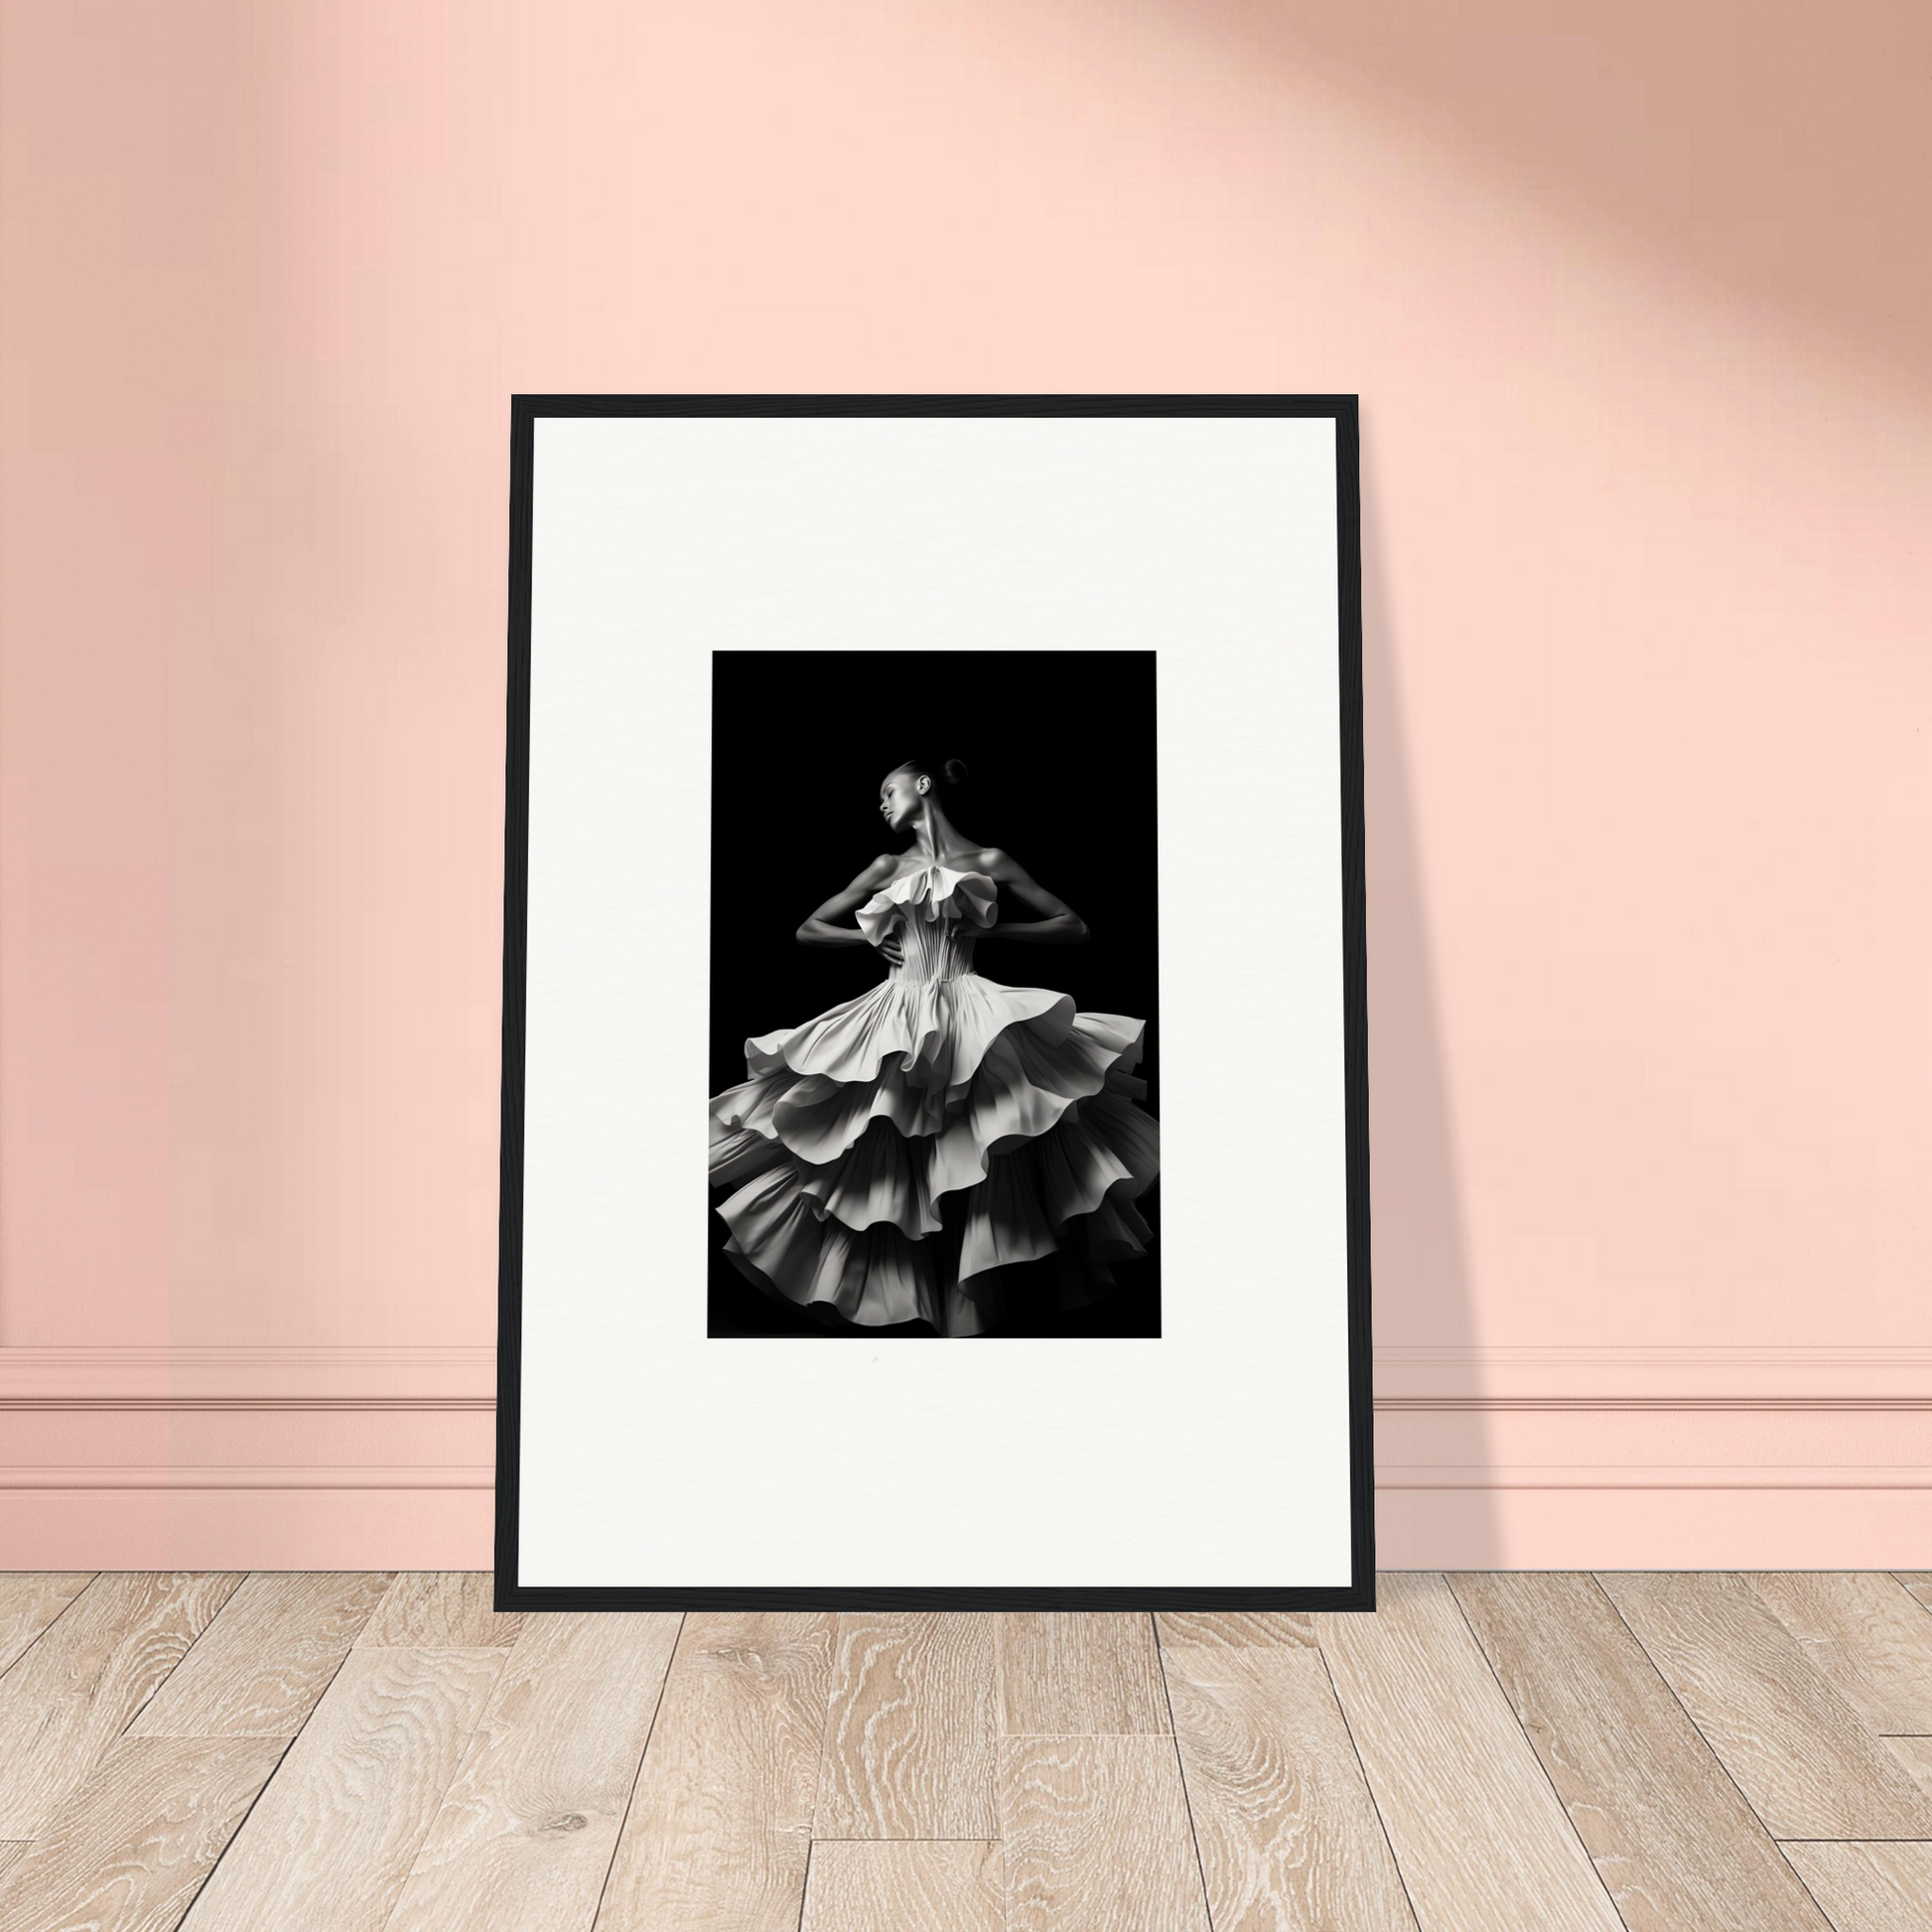 Dancers and time a2 - framed poster - print material